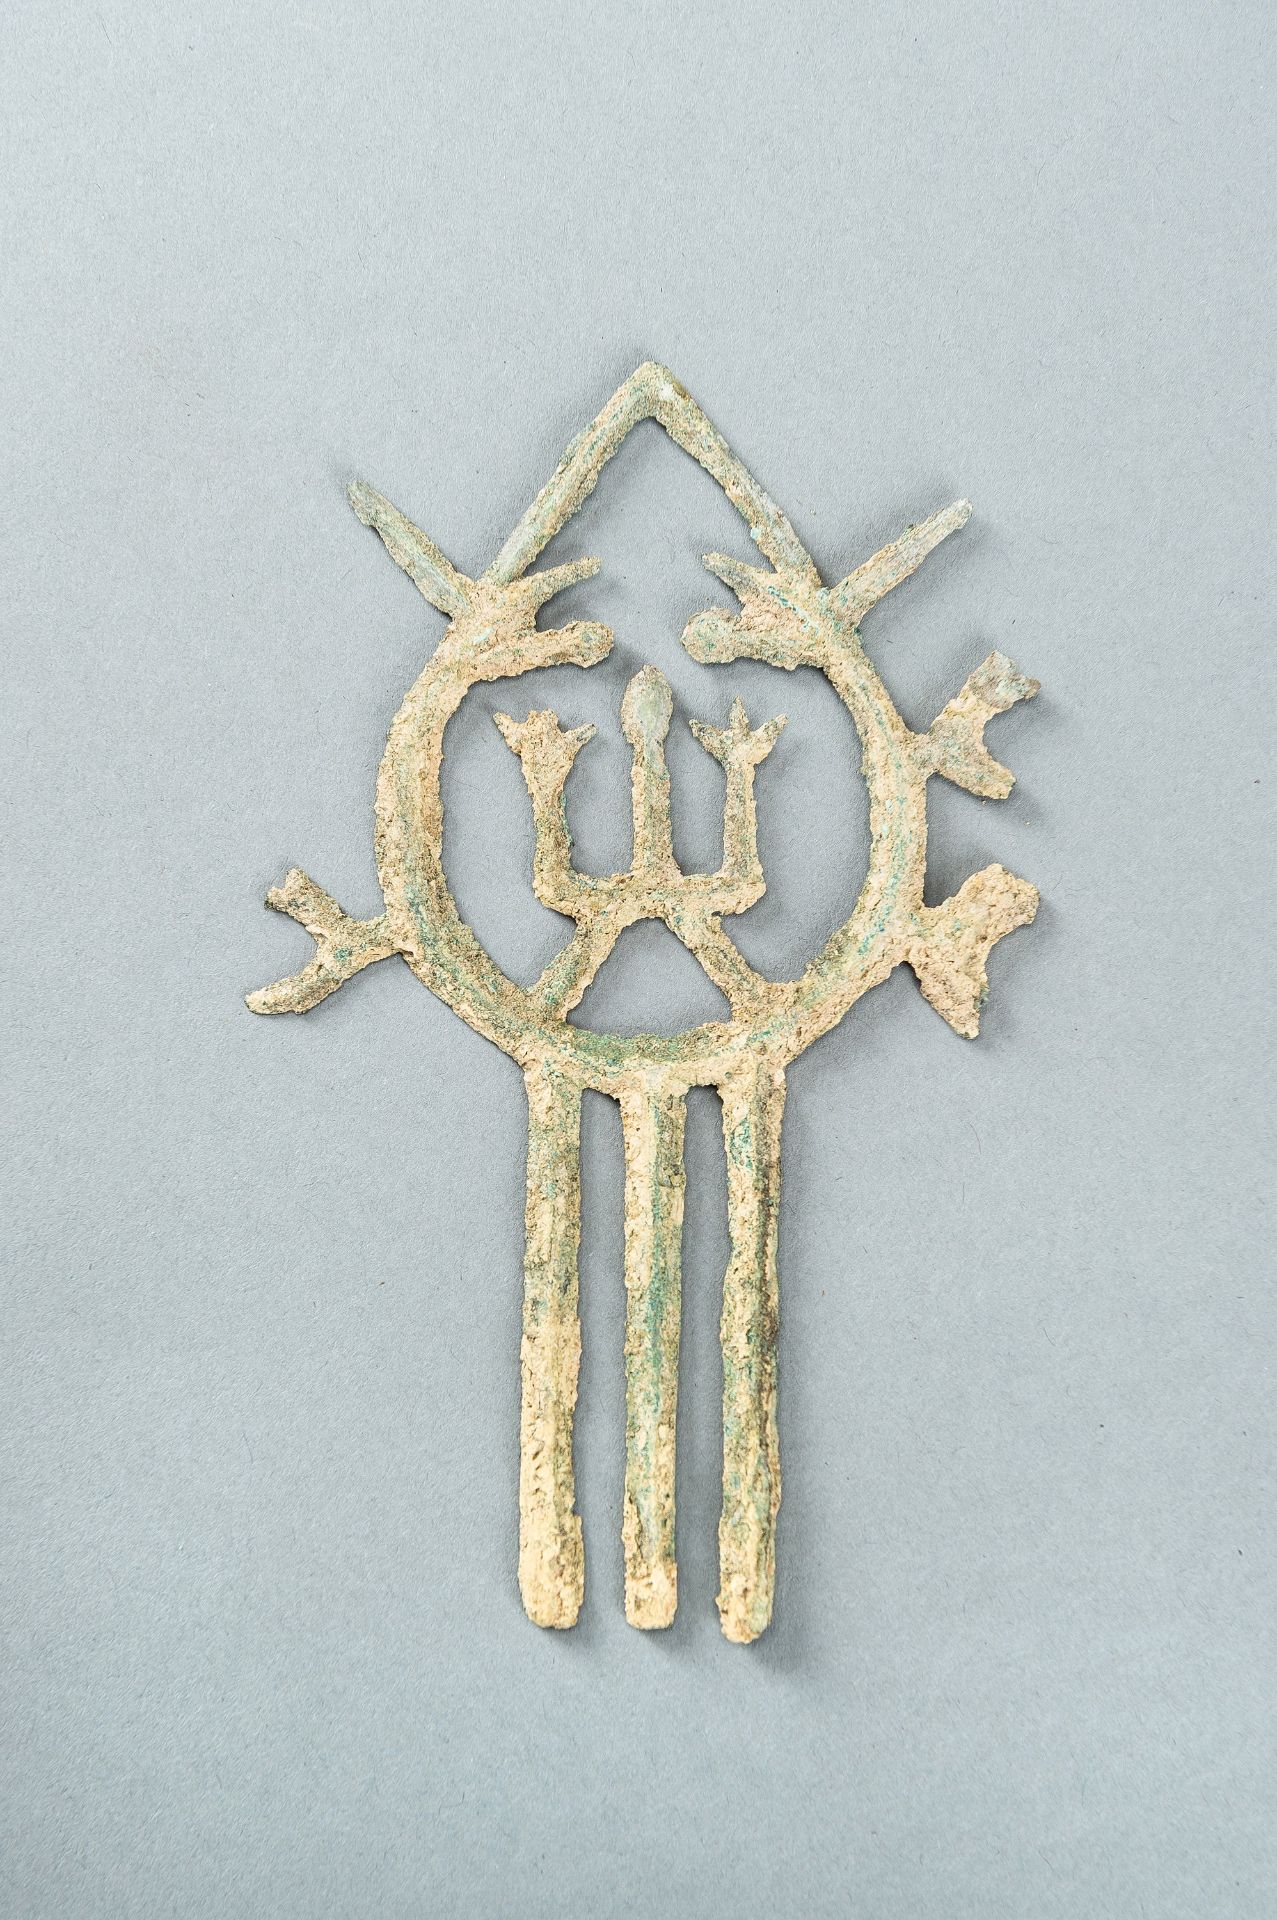 A PAIR OF BRONZE HAIRPINS, DONG SON CULTURE - Image 5 of 11